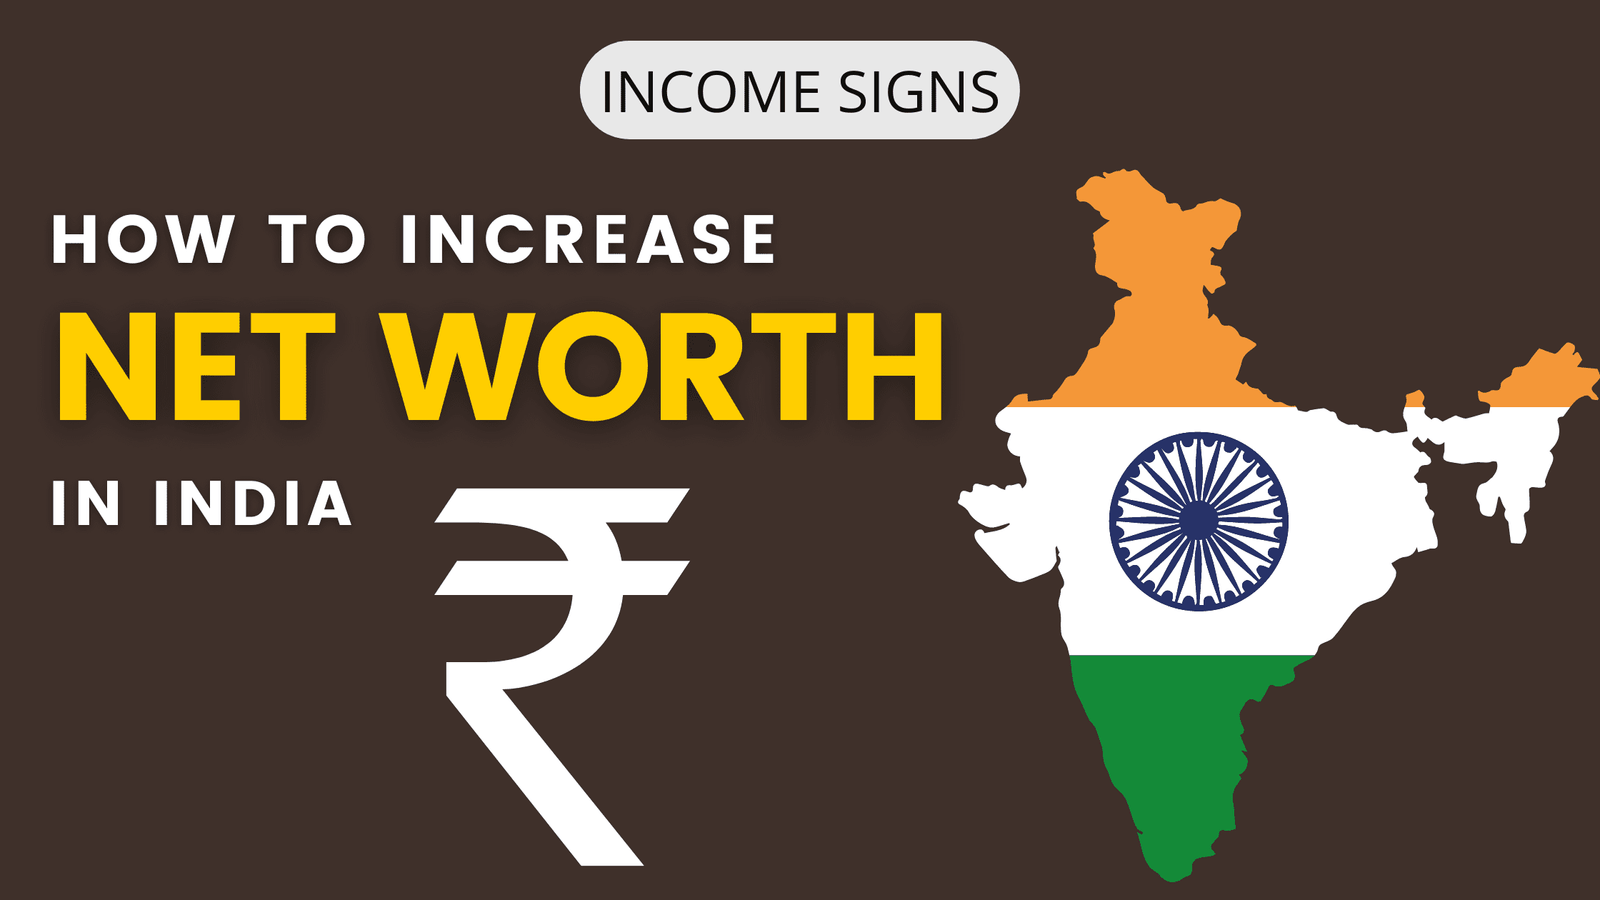 How to Increase Net Worth in India